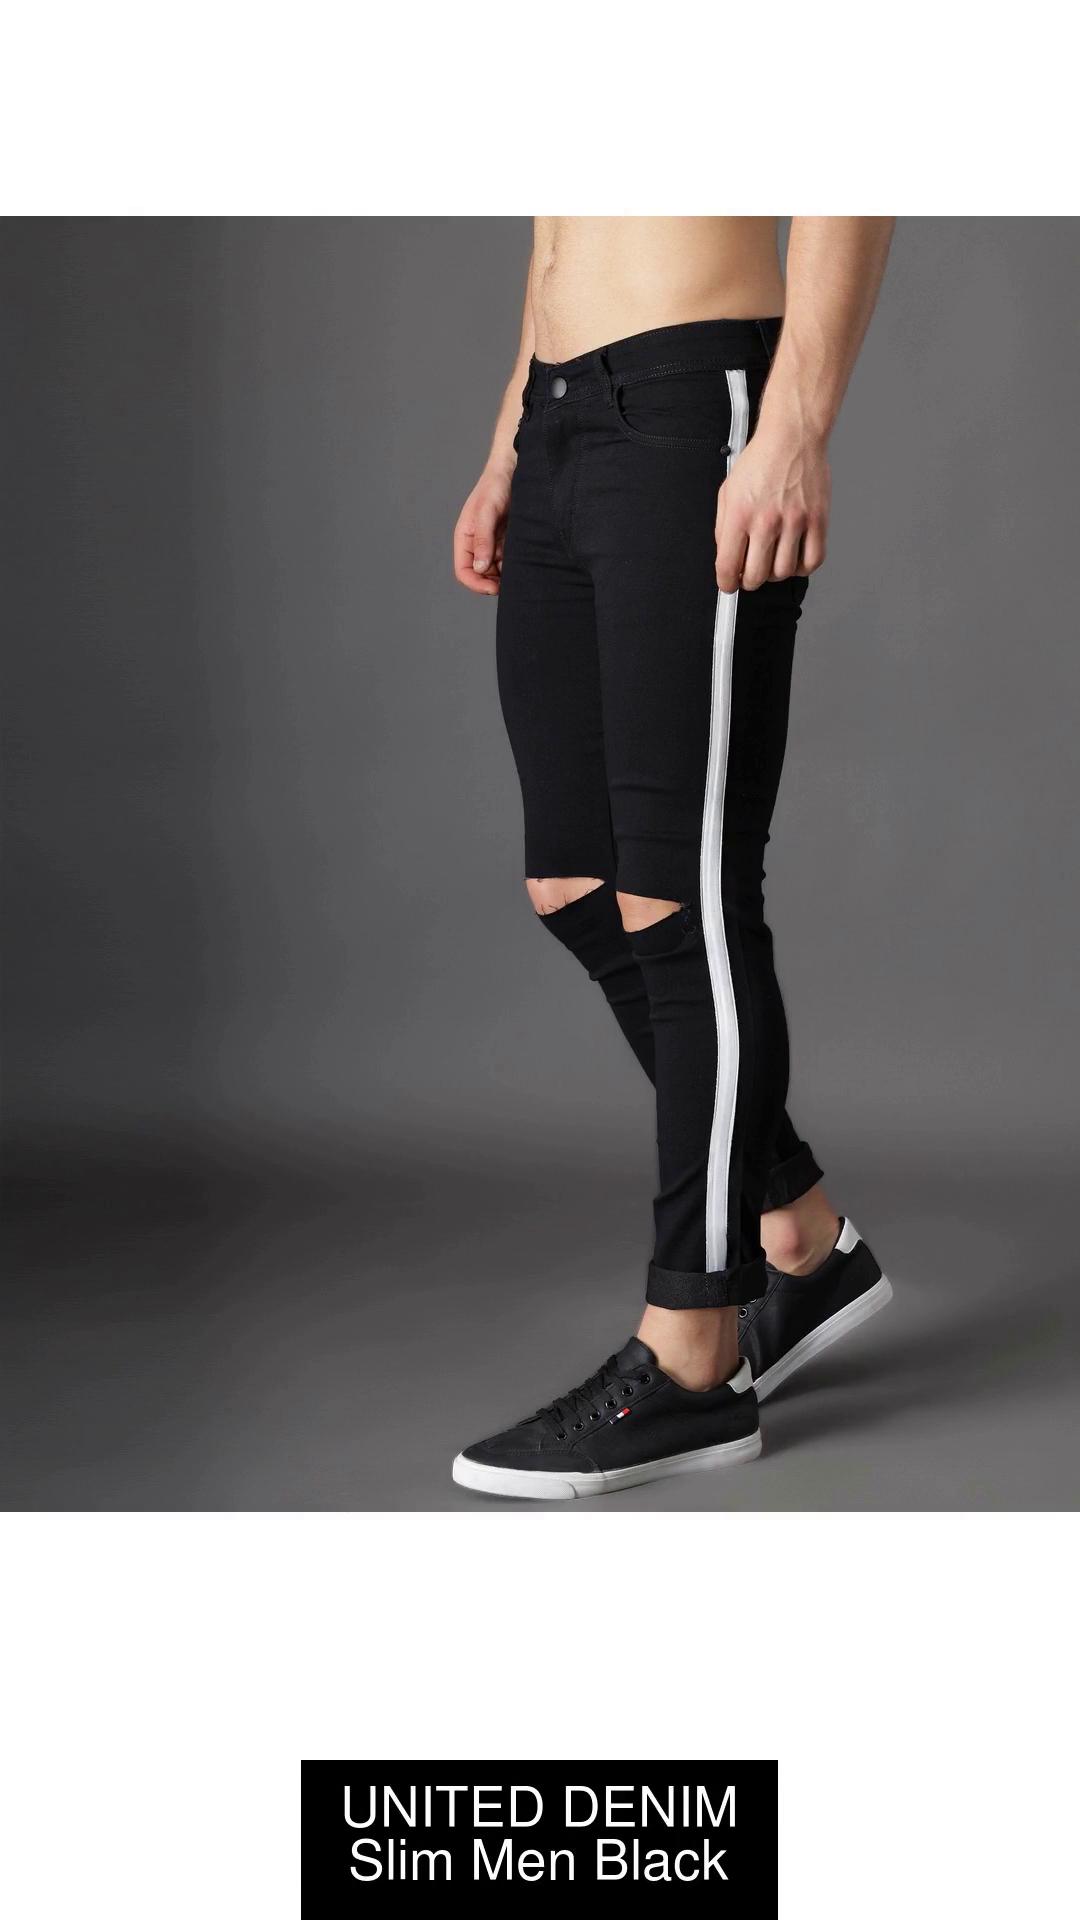 Stylish Black Jeans Pant with Stylish Side Chain for Men